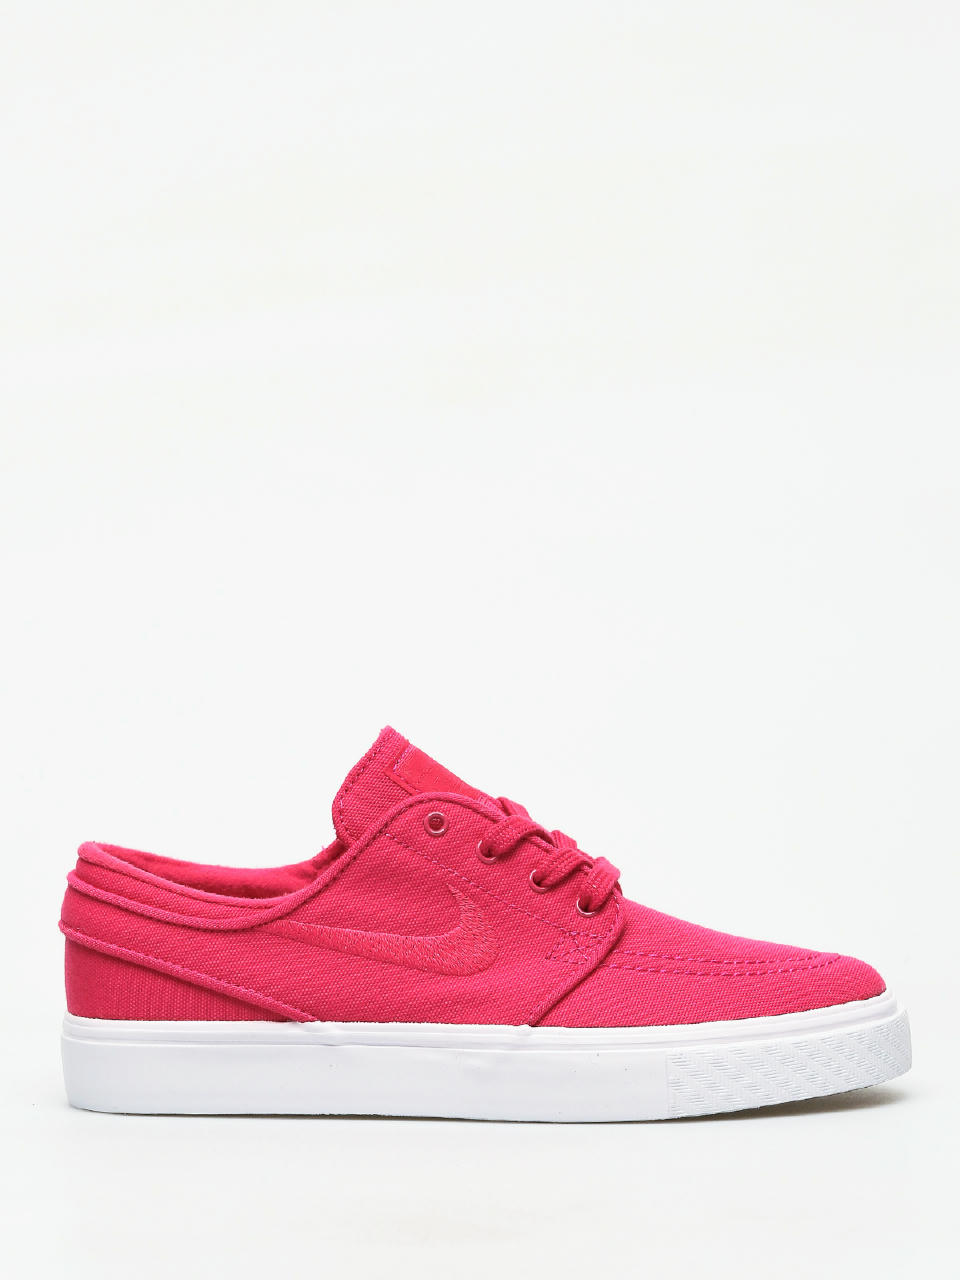 Nike Stefan Canvas Shoes pink/rush pink gum yellow)